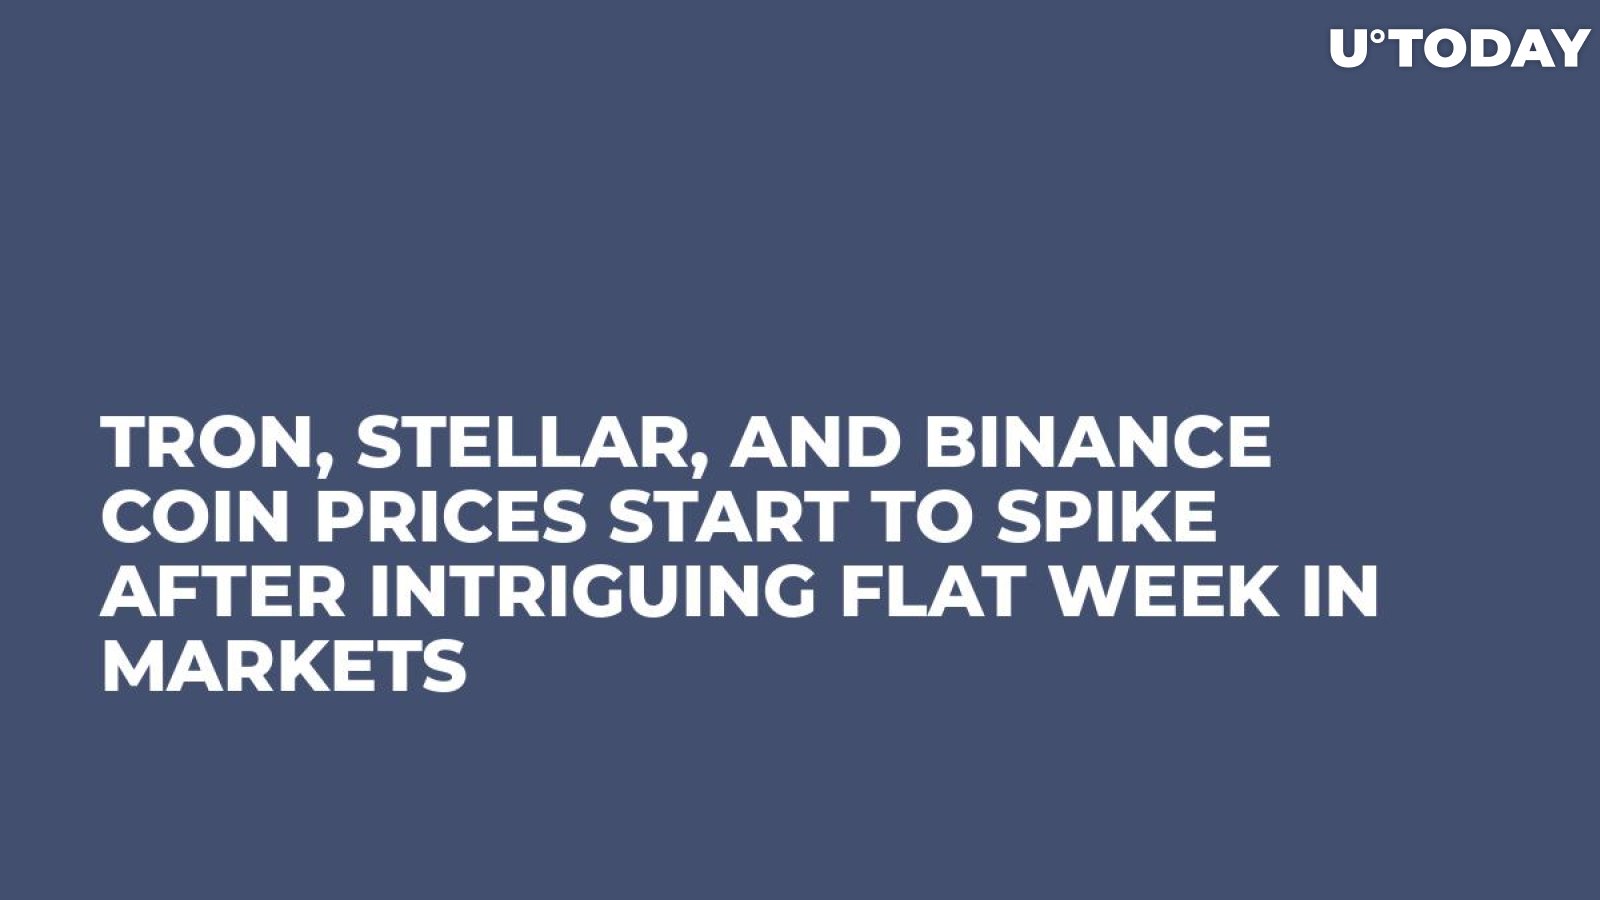 Tron, Stellar, and Binance Coin Prices Start to Spike After Intriguing Flat Week in Markets